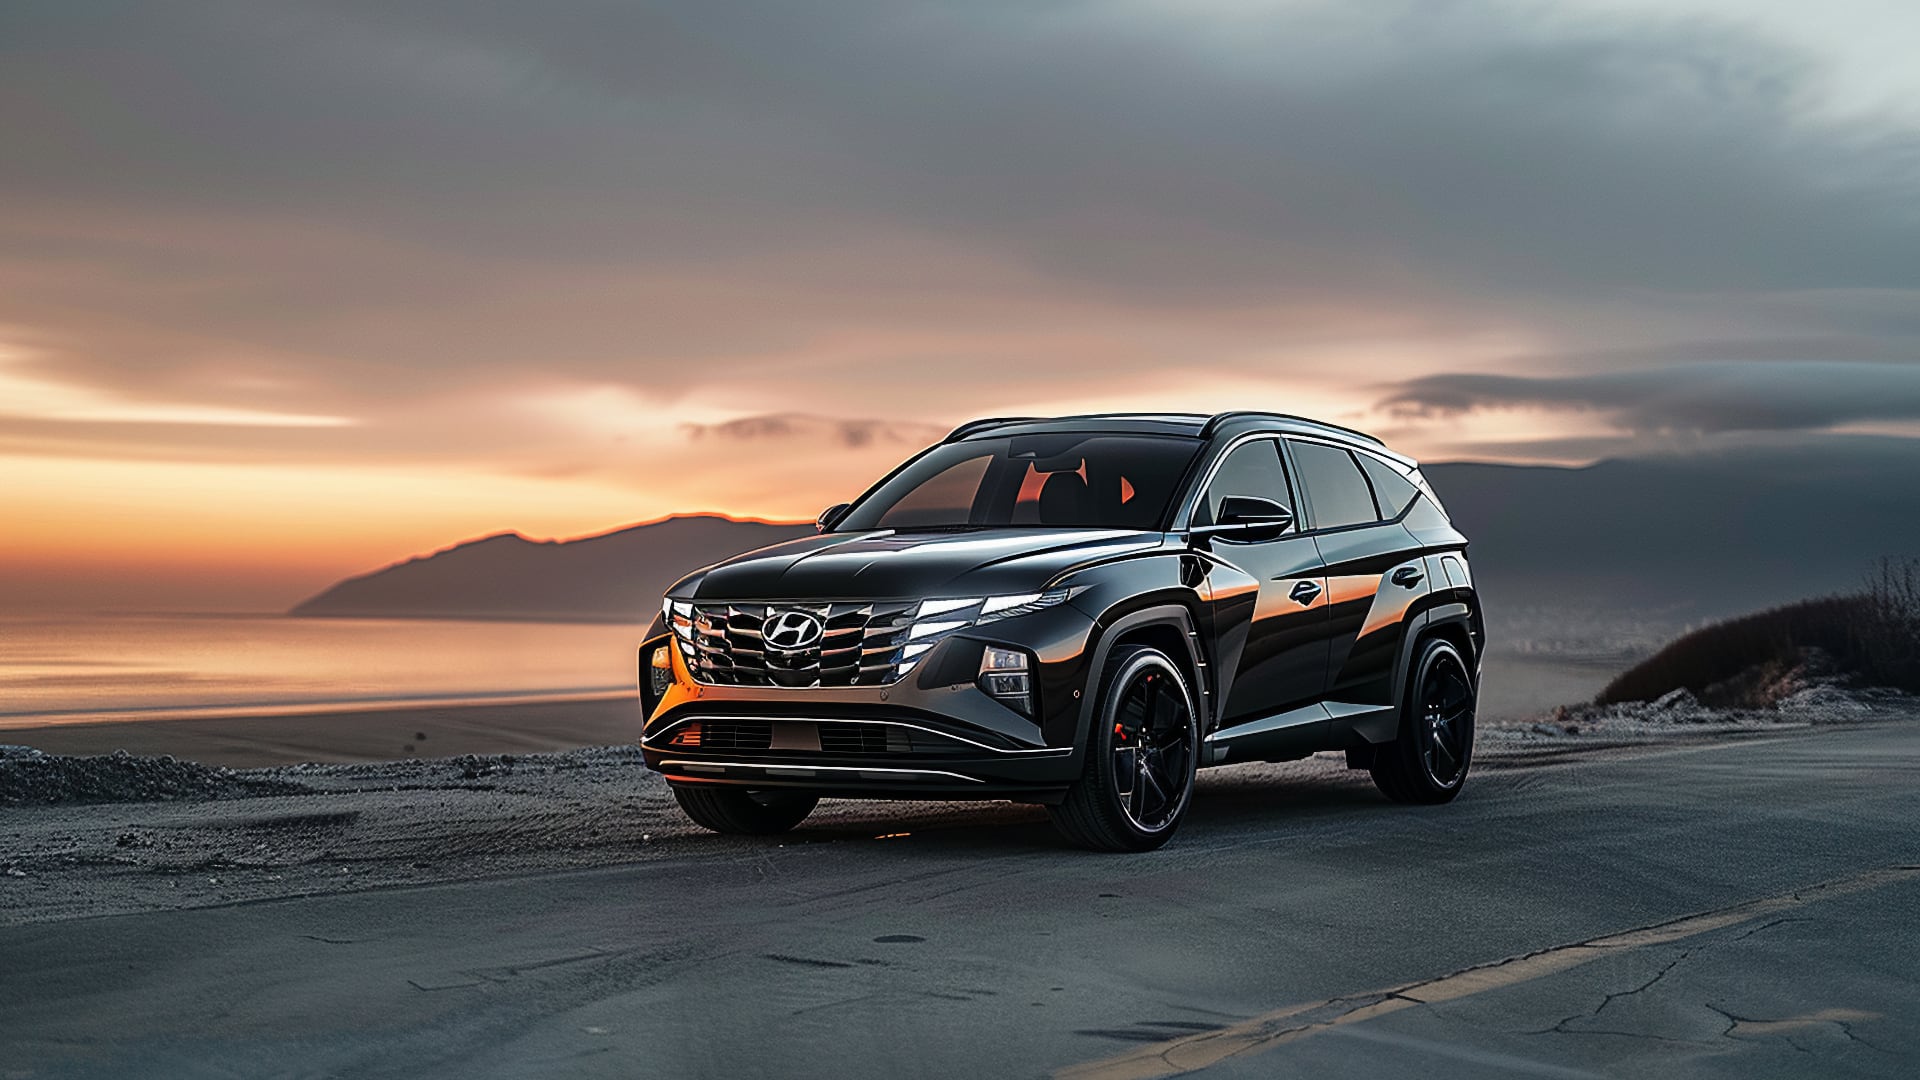 Avoid the 2020 Hyundai Santa Fe for any issues similar to those found in certain Hyundai Tucson years.